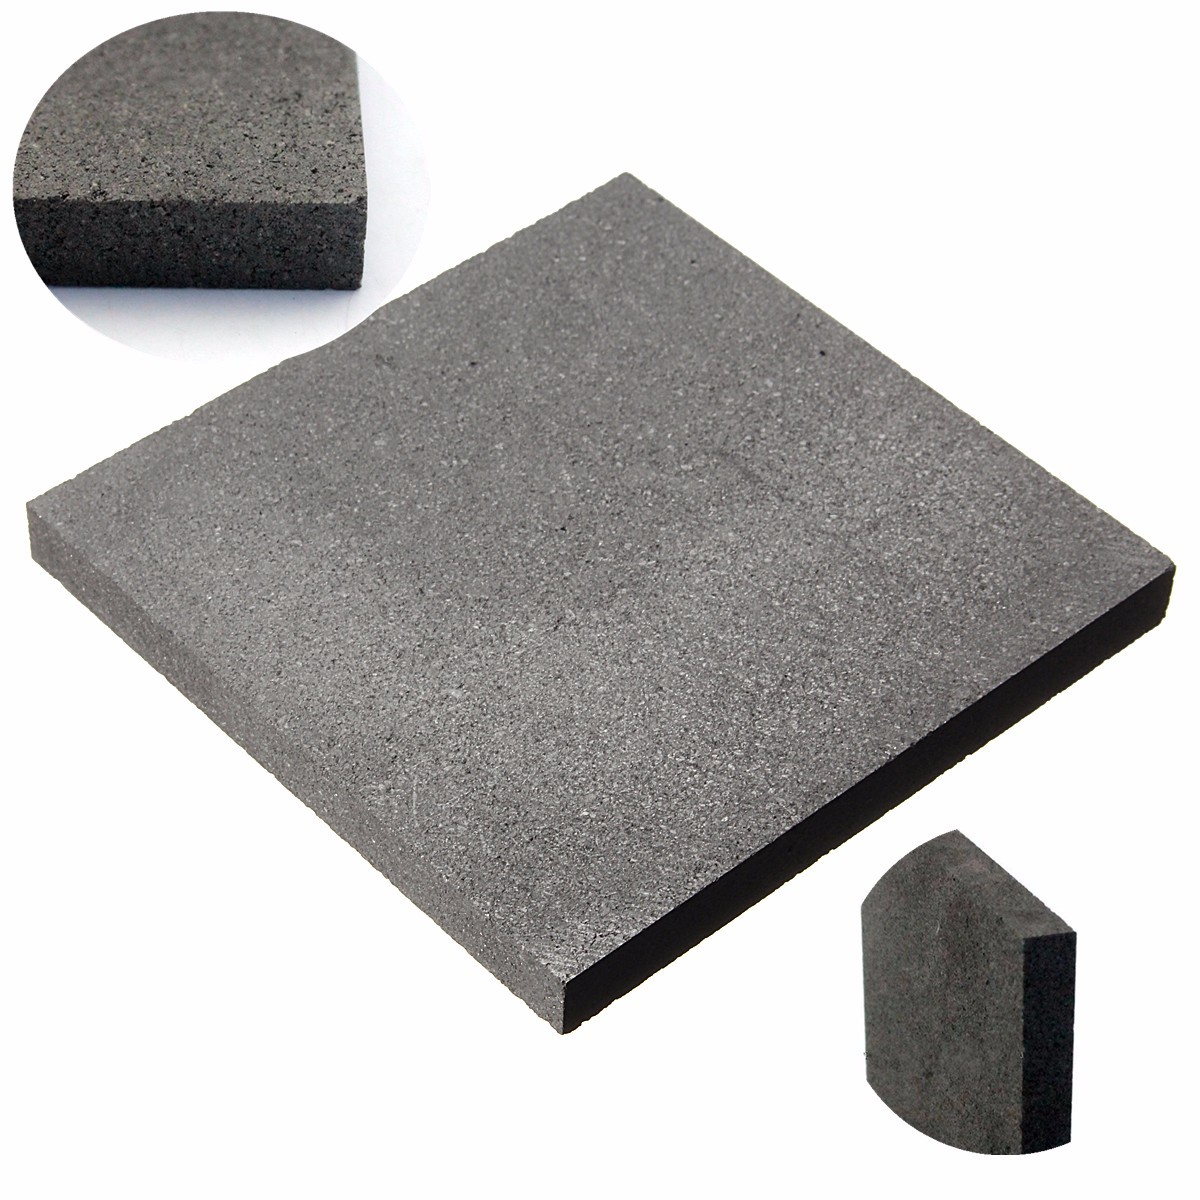 100x100x10mm High Purity 99.9% Graphite Block Electrode Rectangle Plate Blank Sheet